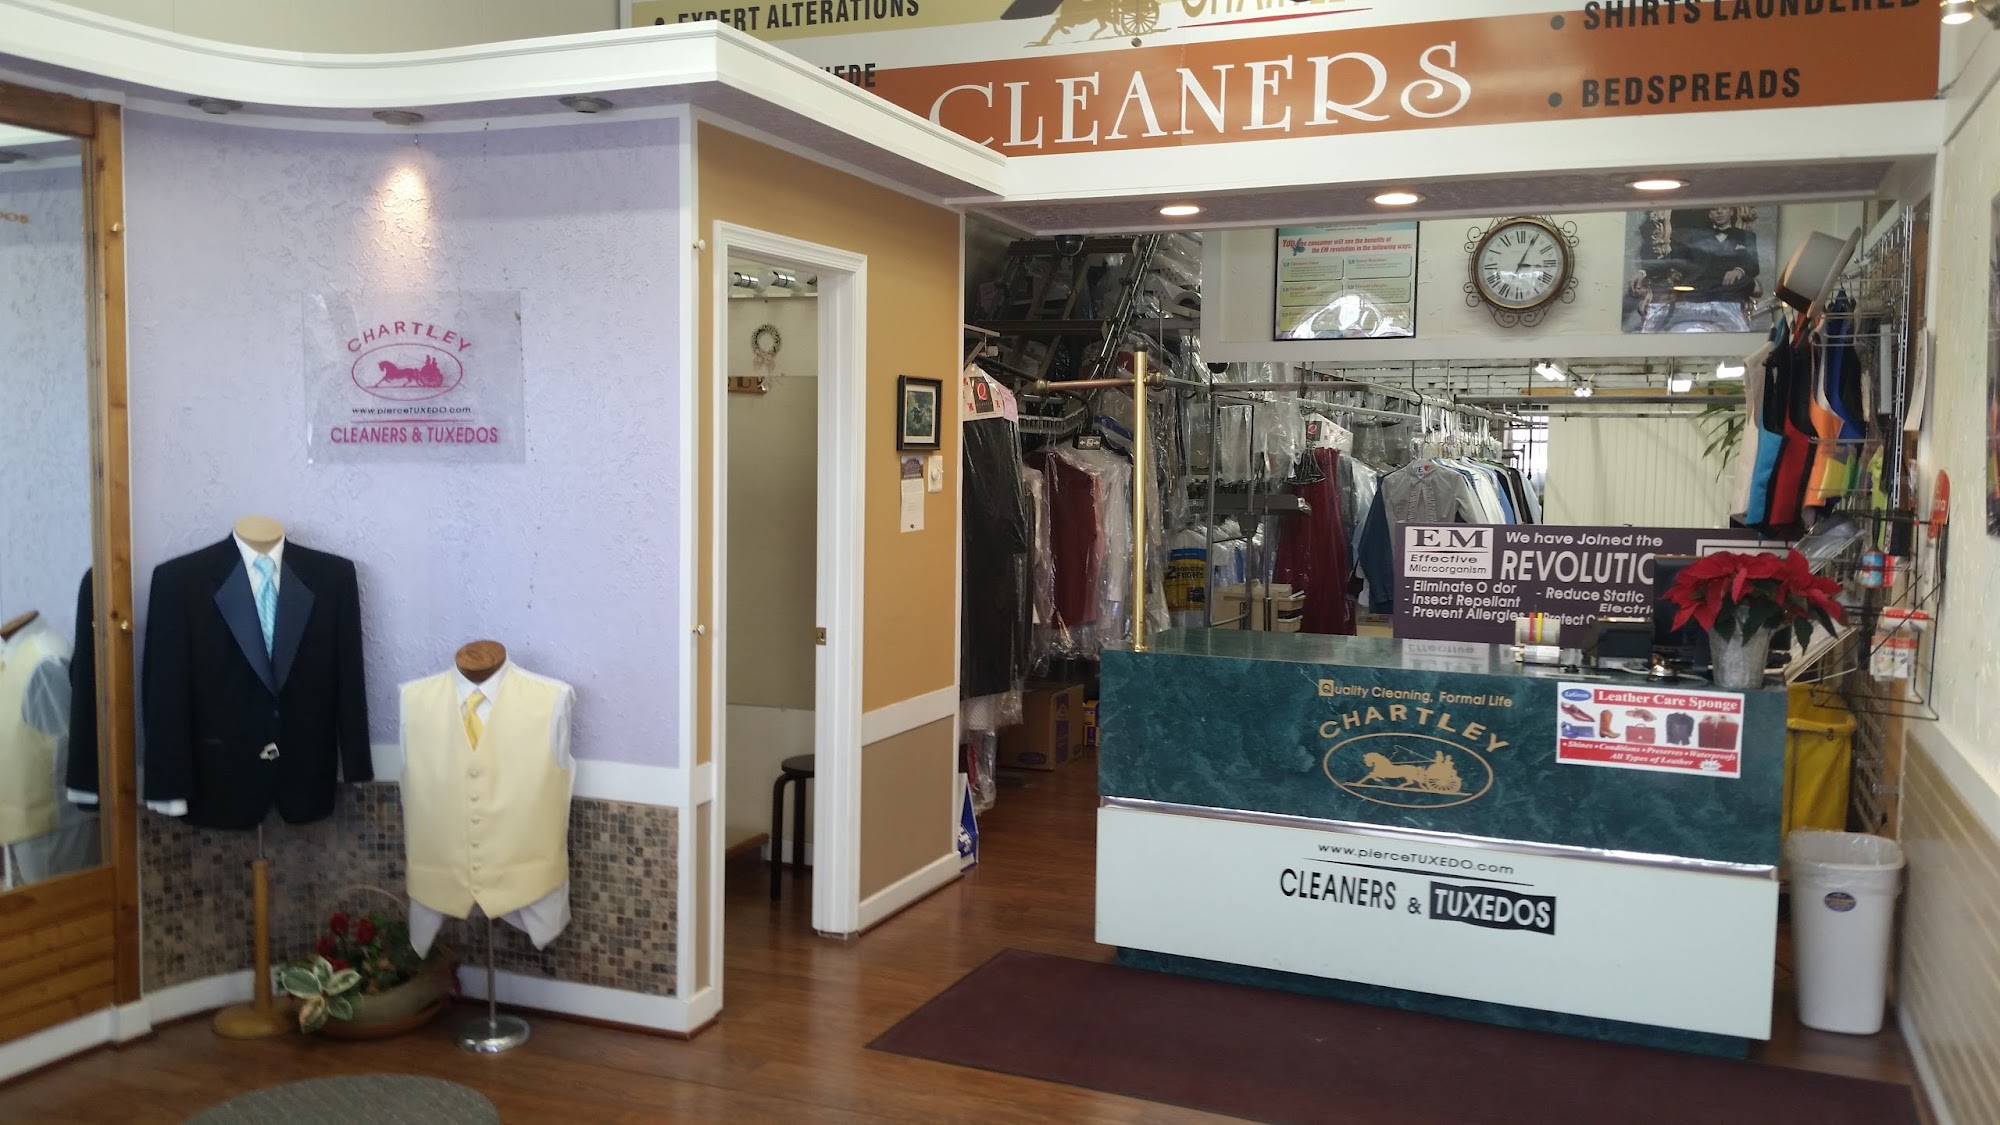 Chartley Cleaners & Tailoring LLC